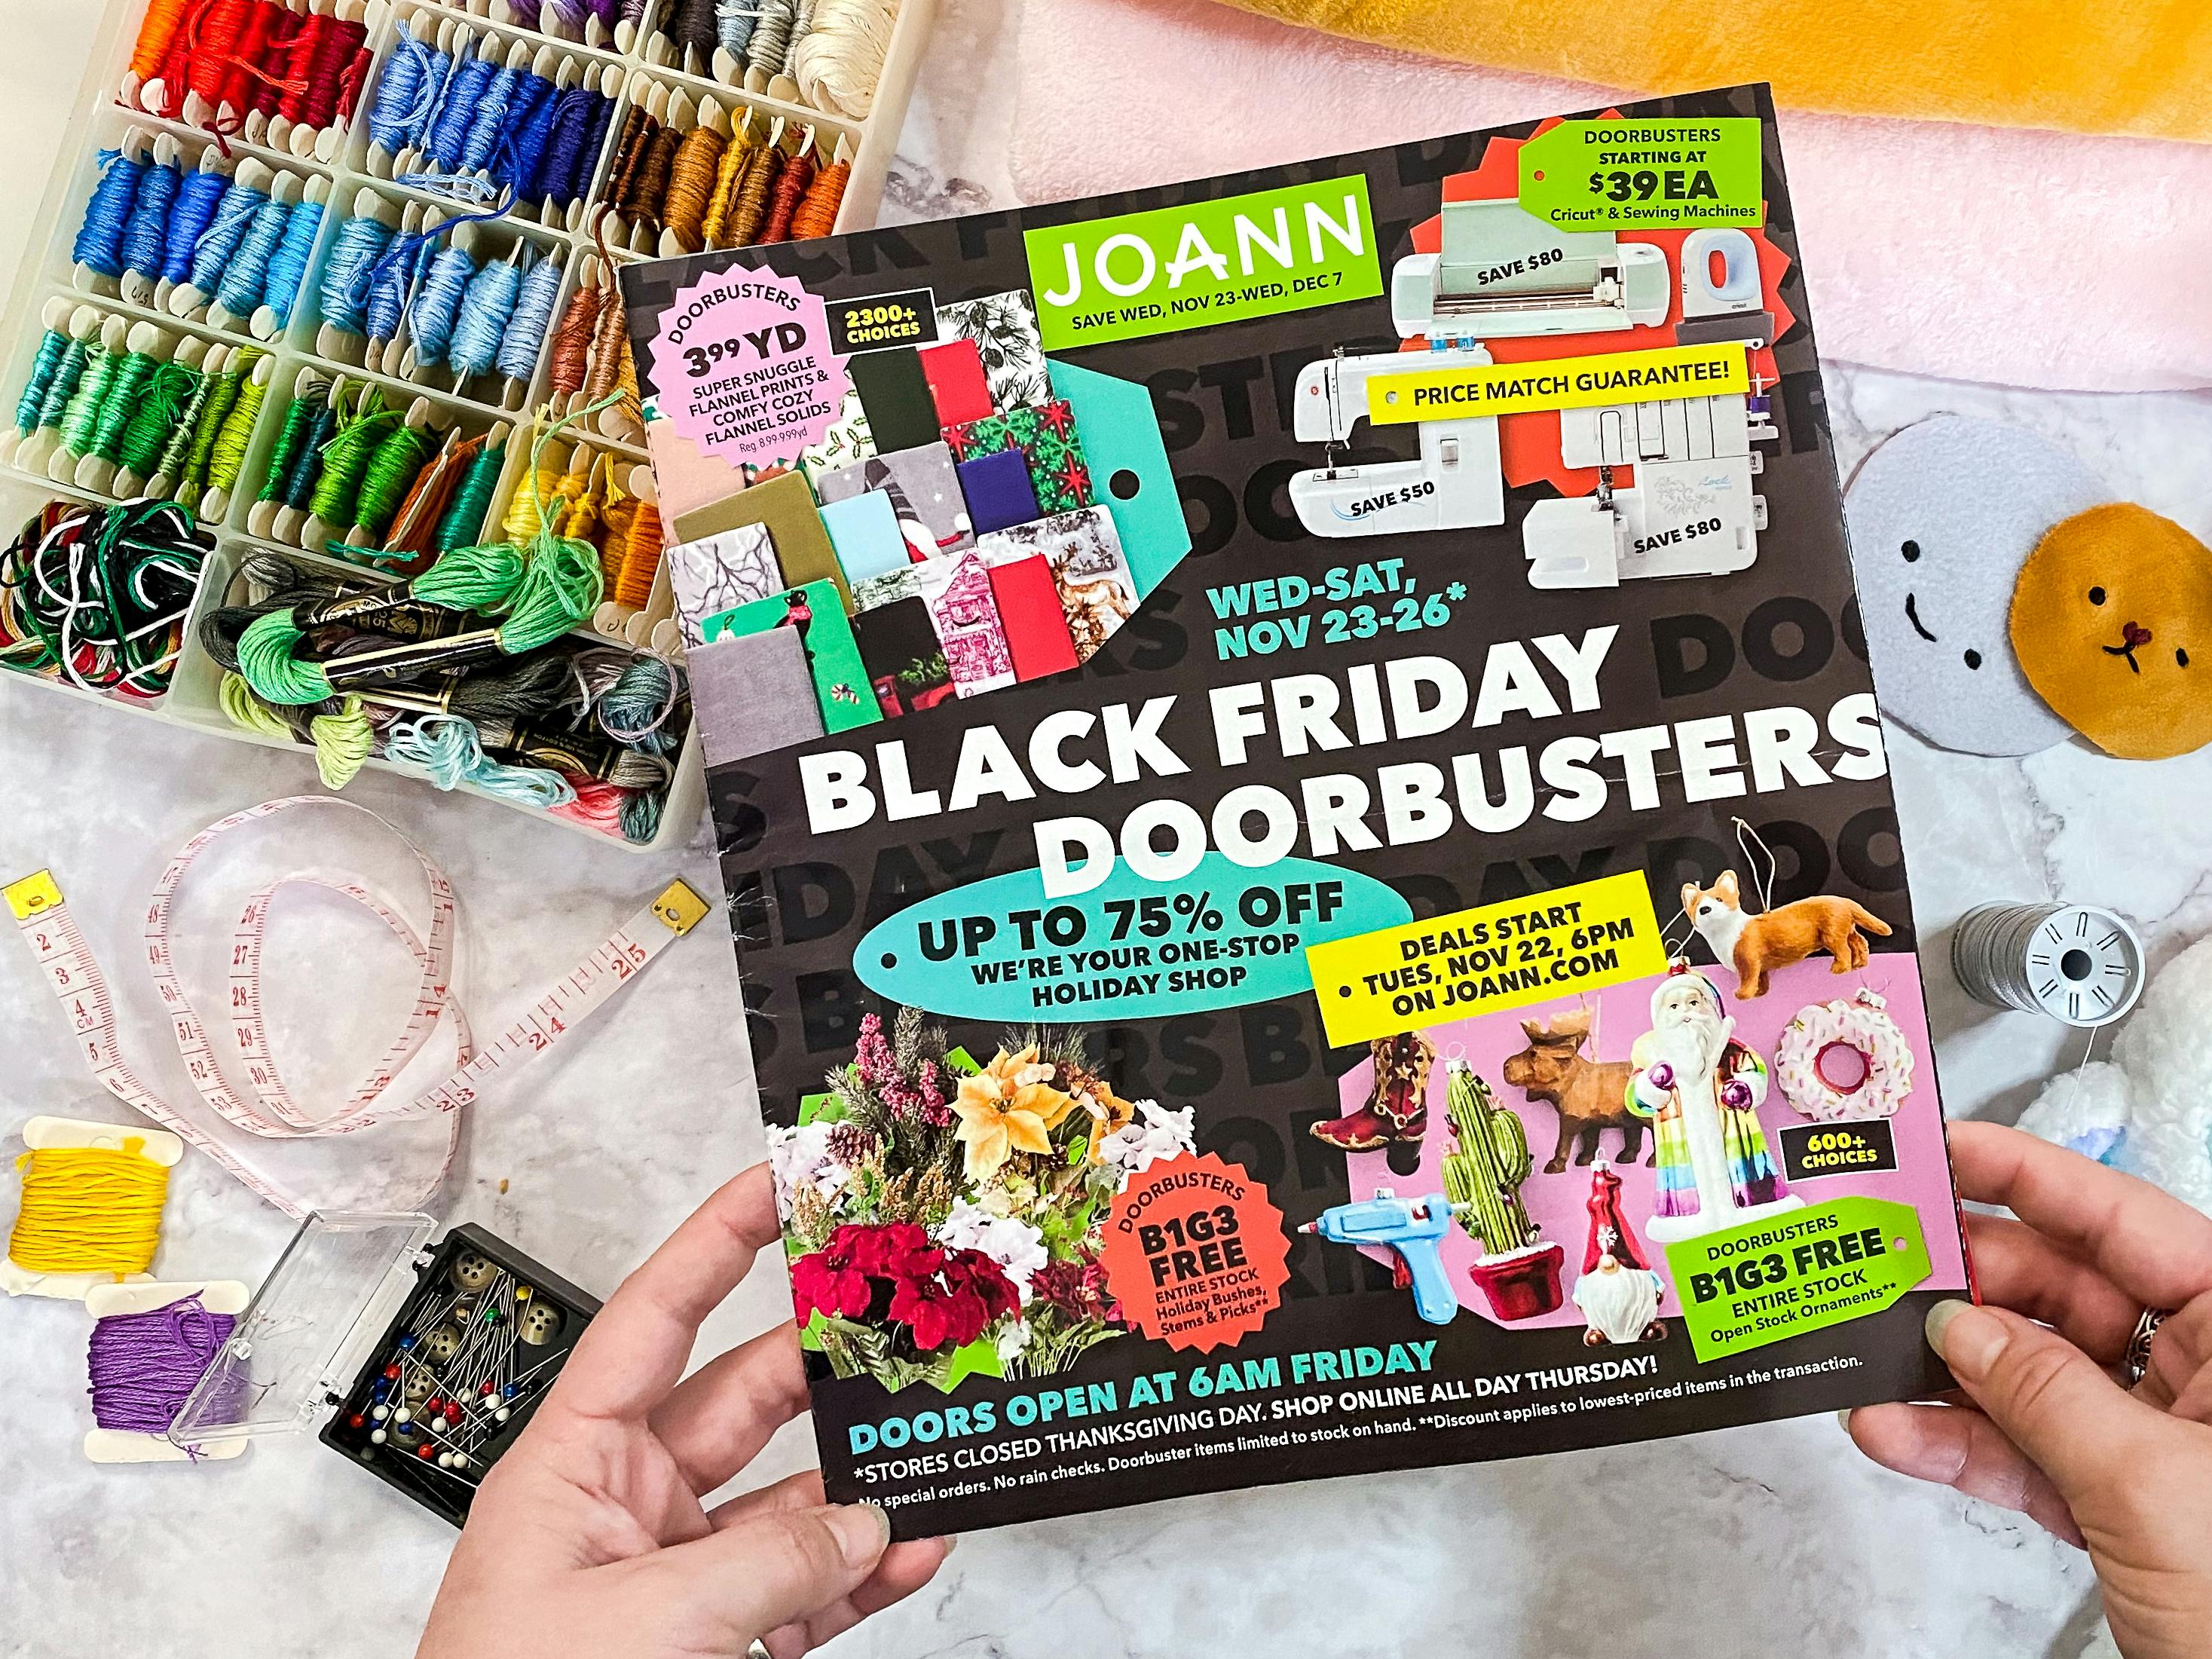 Someone picking up the Joann Fabrics Black Friday 2022 advertisement from a table with sewing supplies and handmade plush dolls